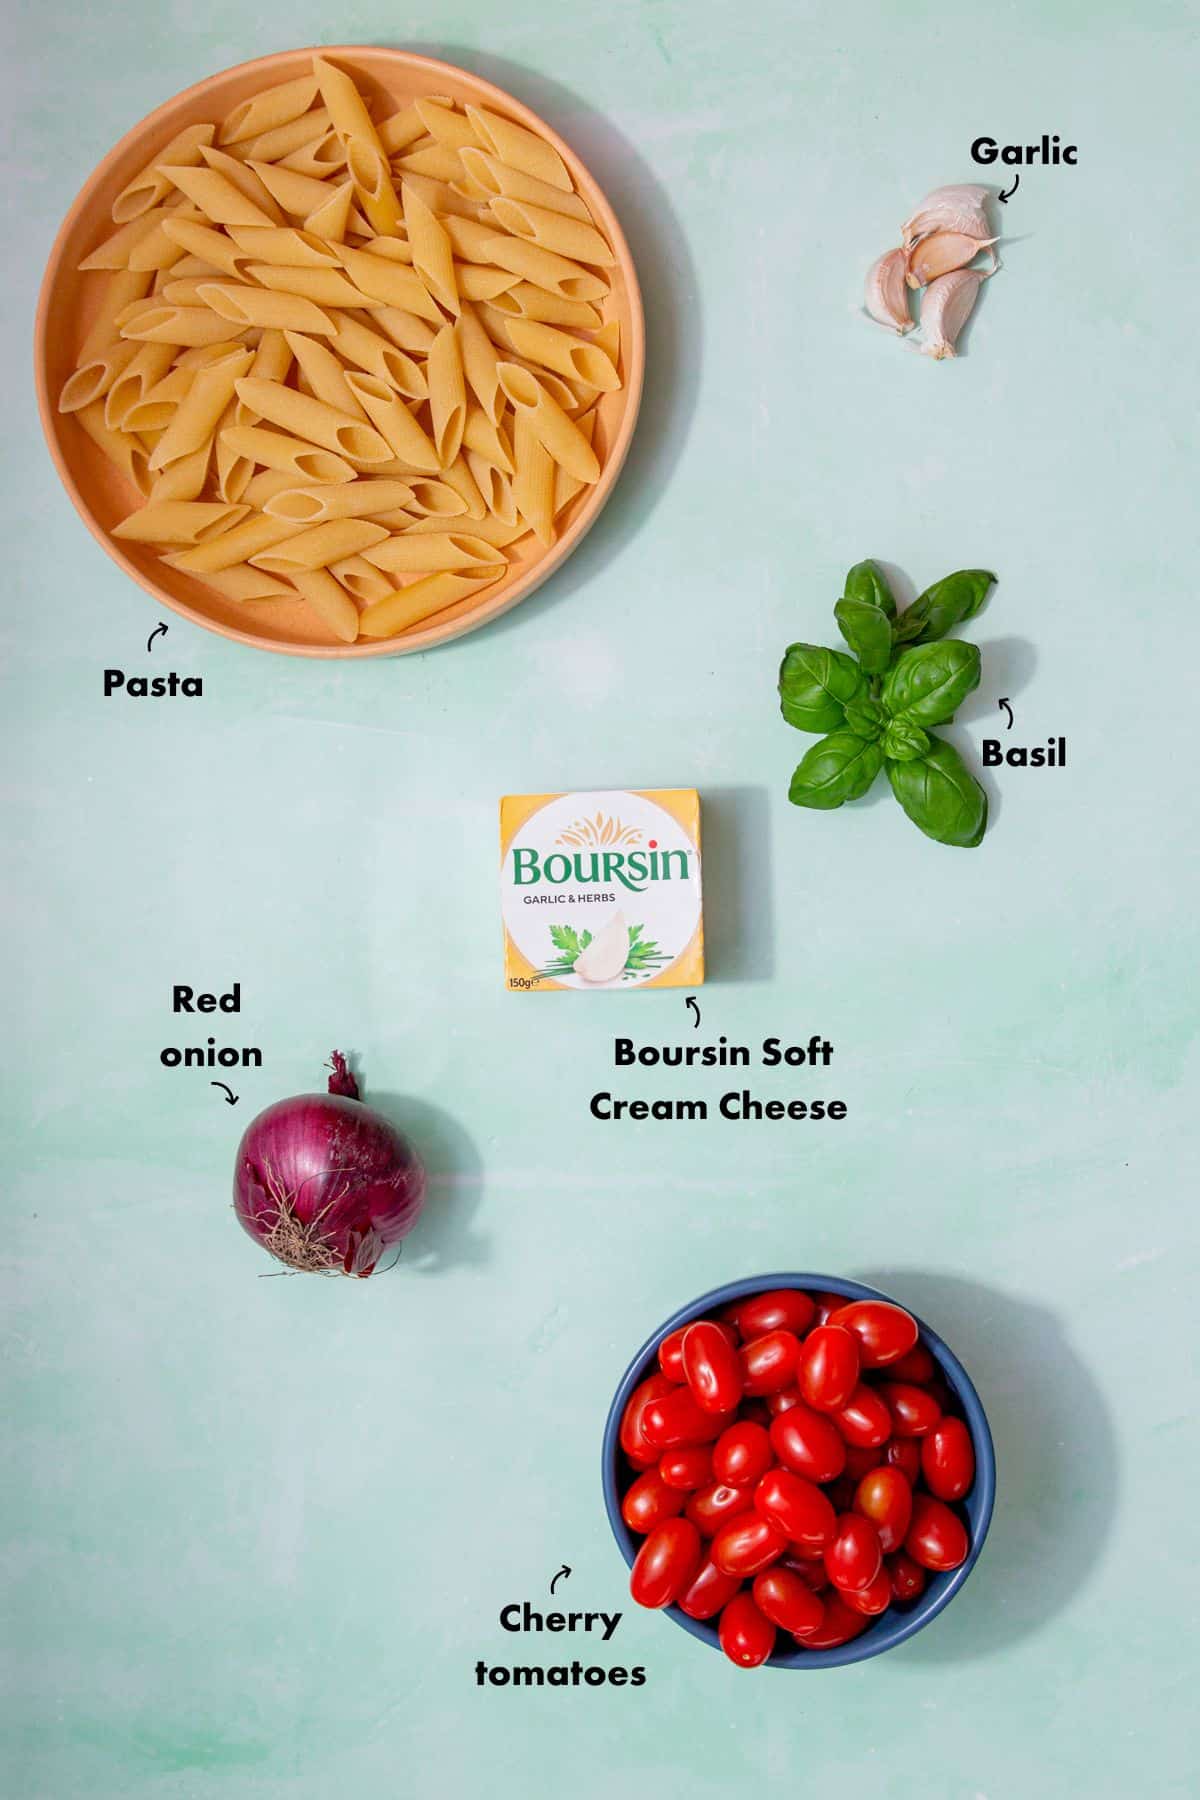 Ingredients to make the pasta with Boursin, fresh basil, red onion and cherry tomatoes laid out on a pale blue background and labelled.